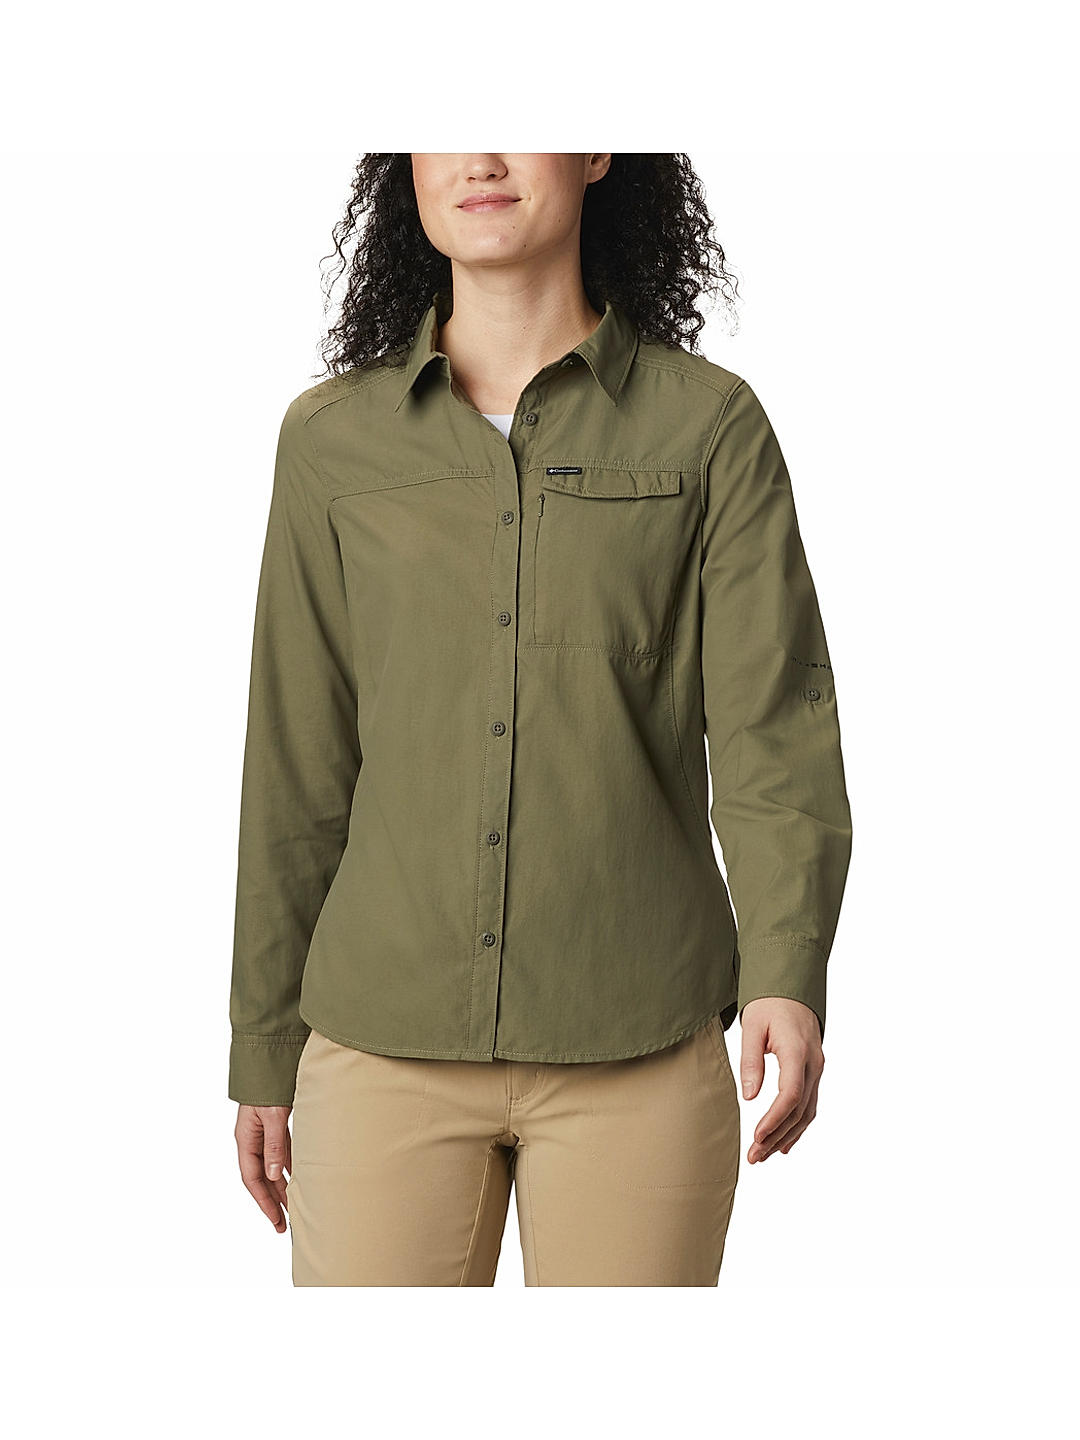 Buy Green Silver Ridge 2.0 Long Sleeve for Women Online at Columbia Sp